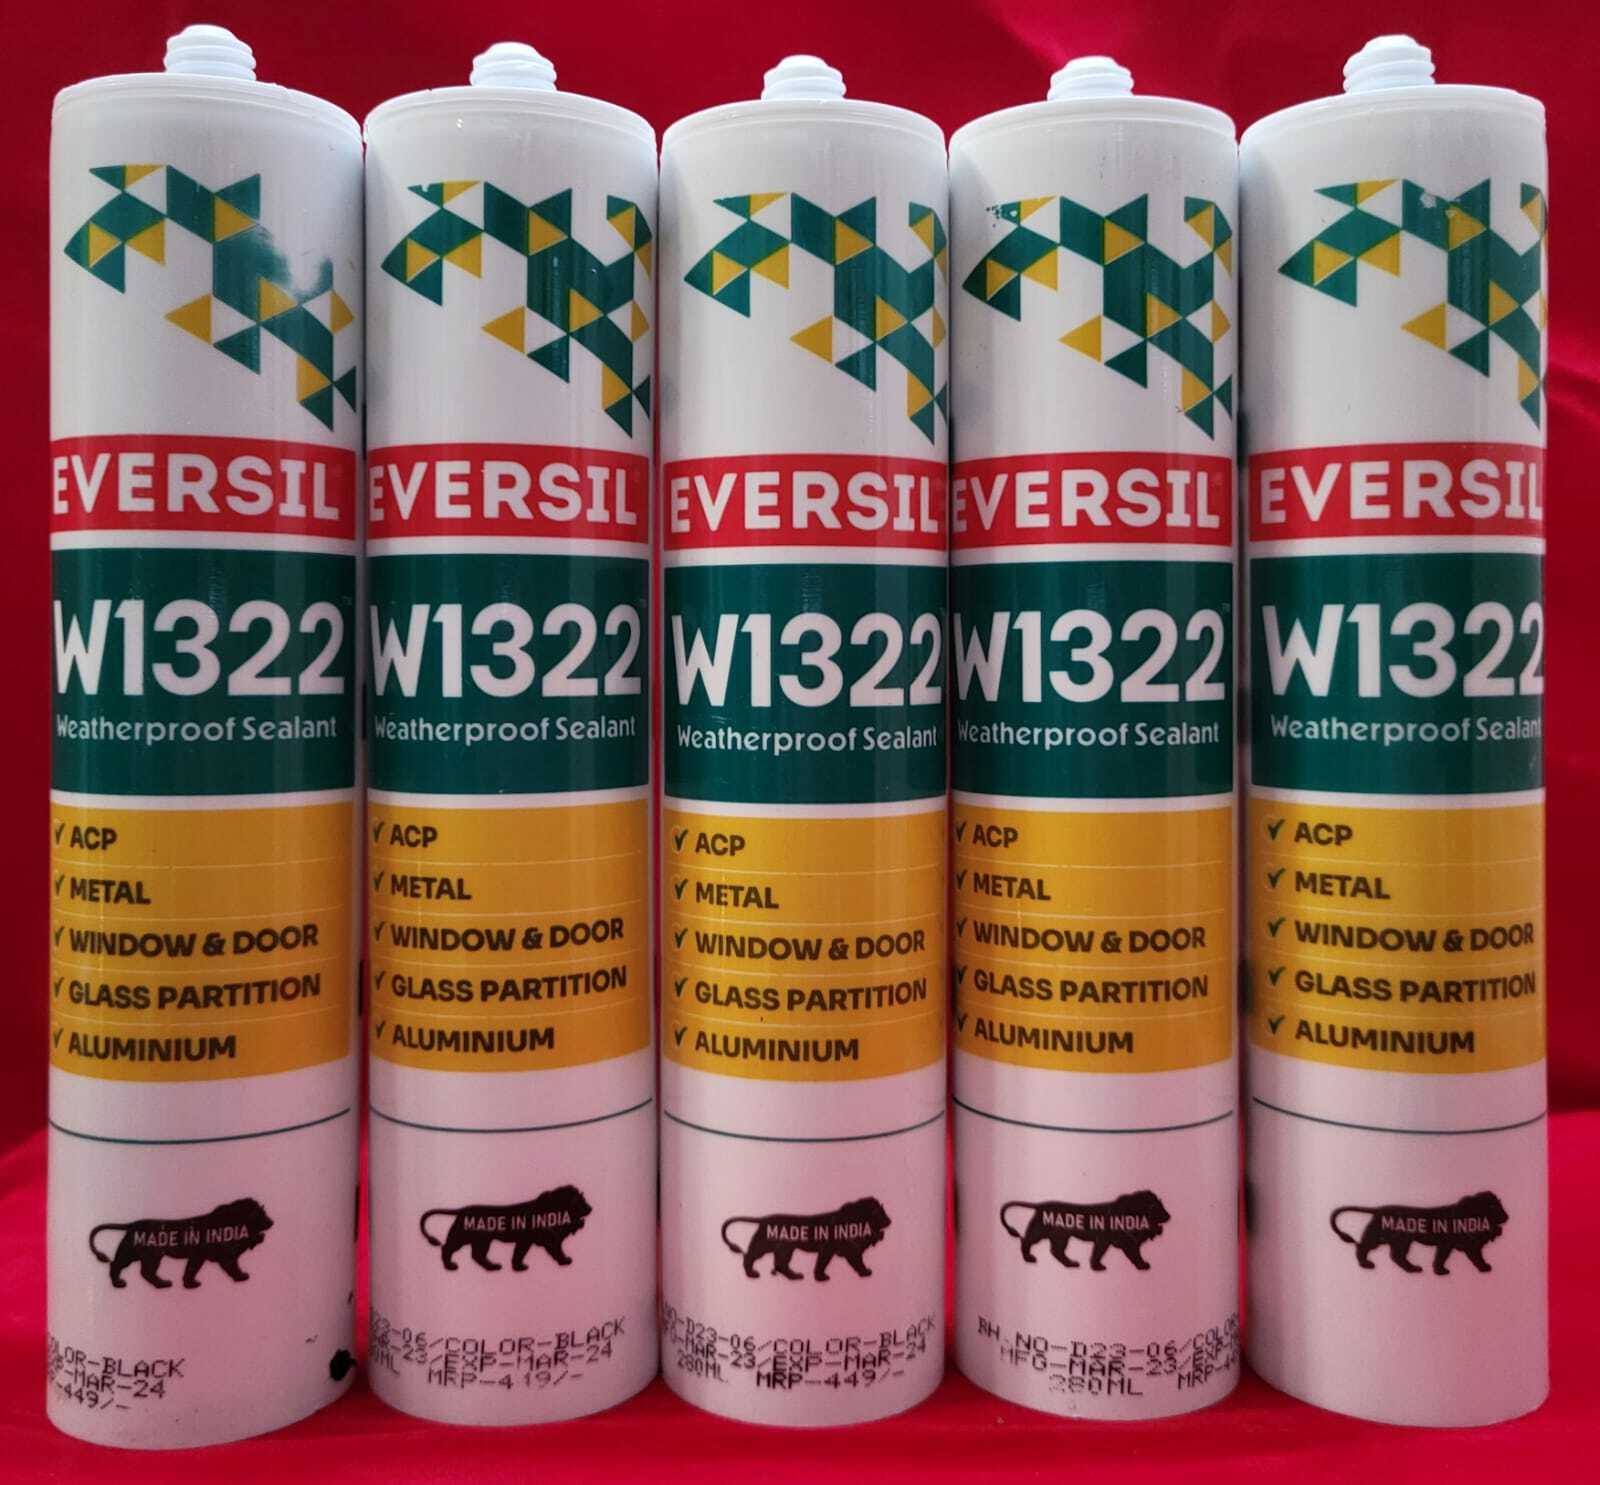 WEATHER PROOF SILICON SEALANT